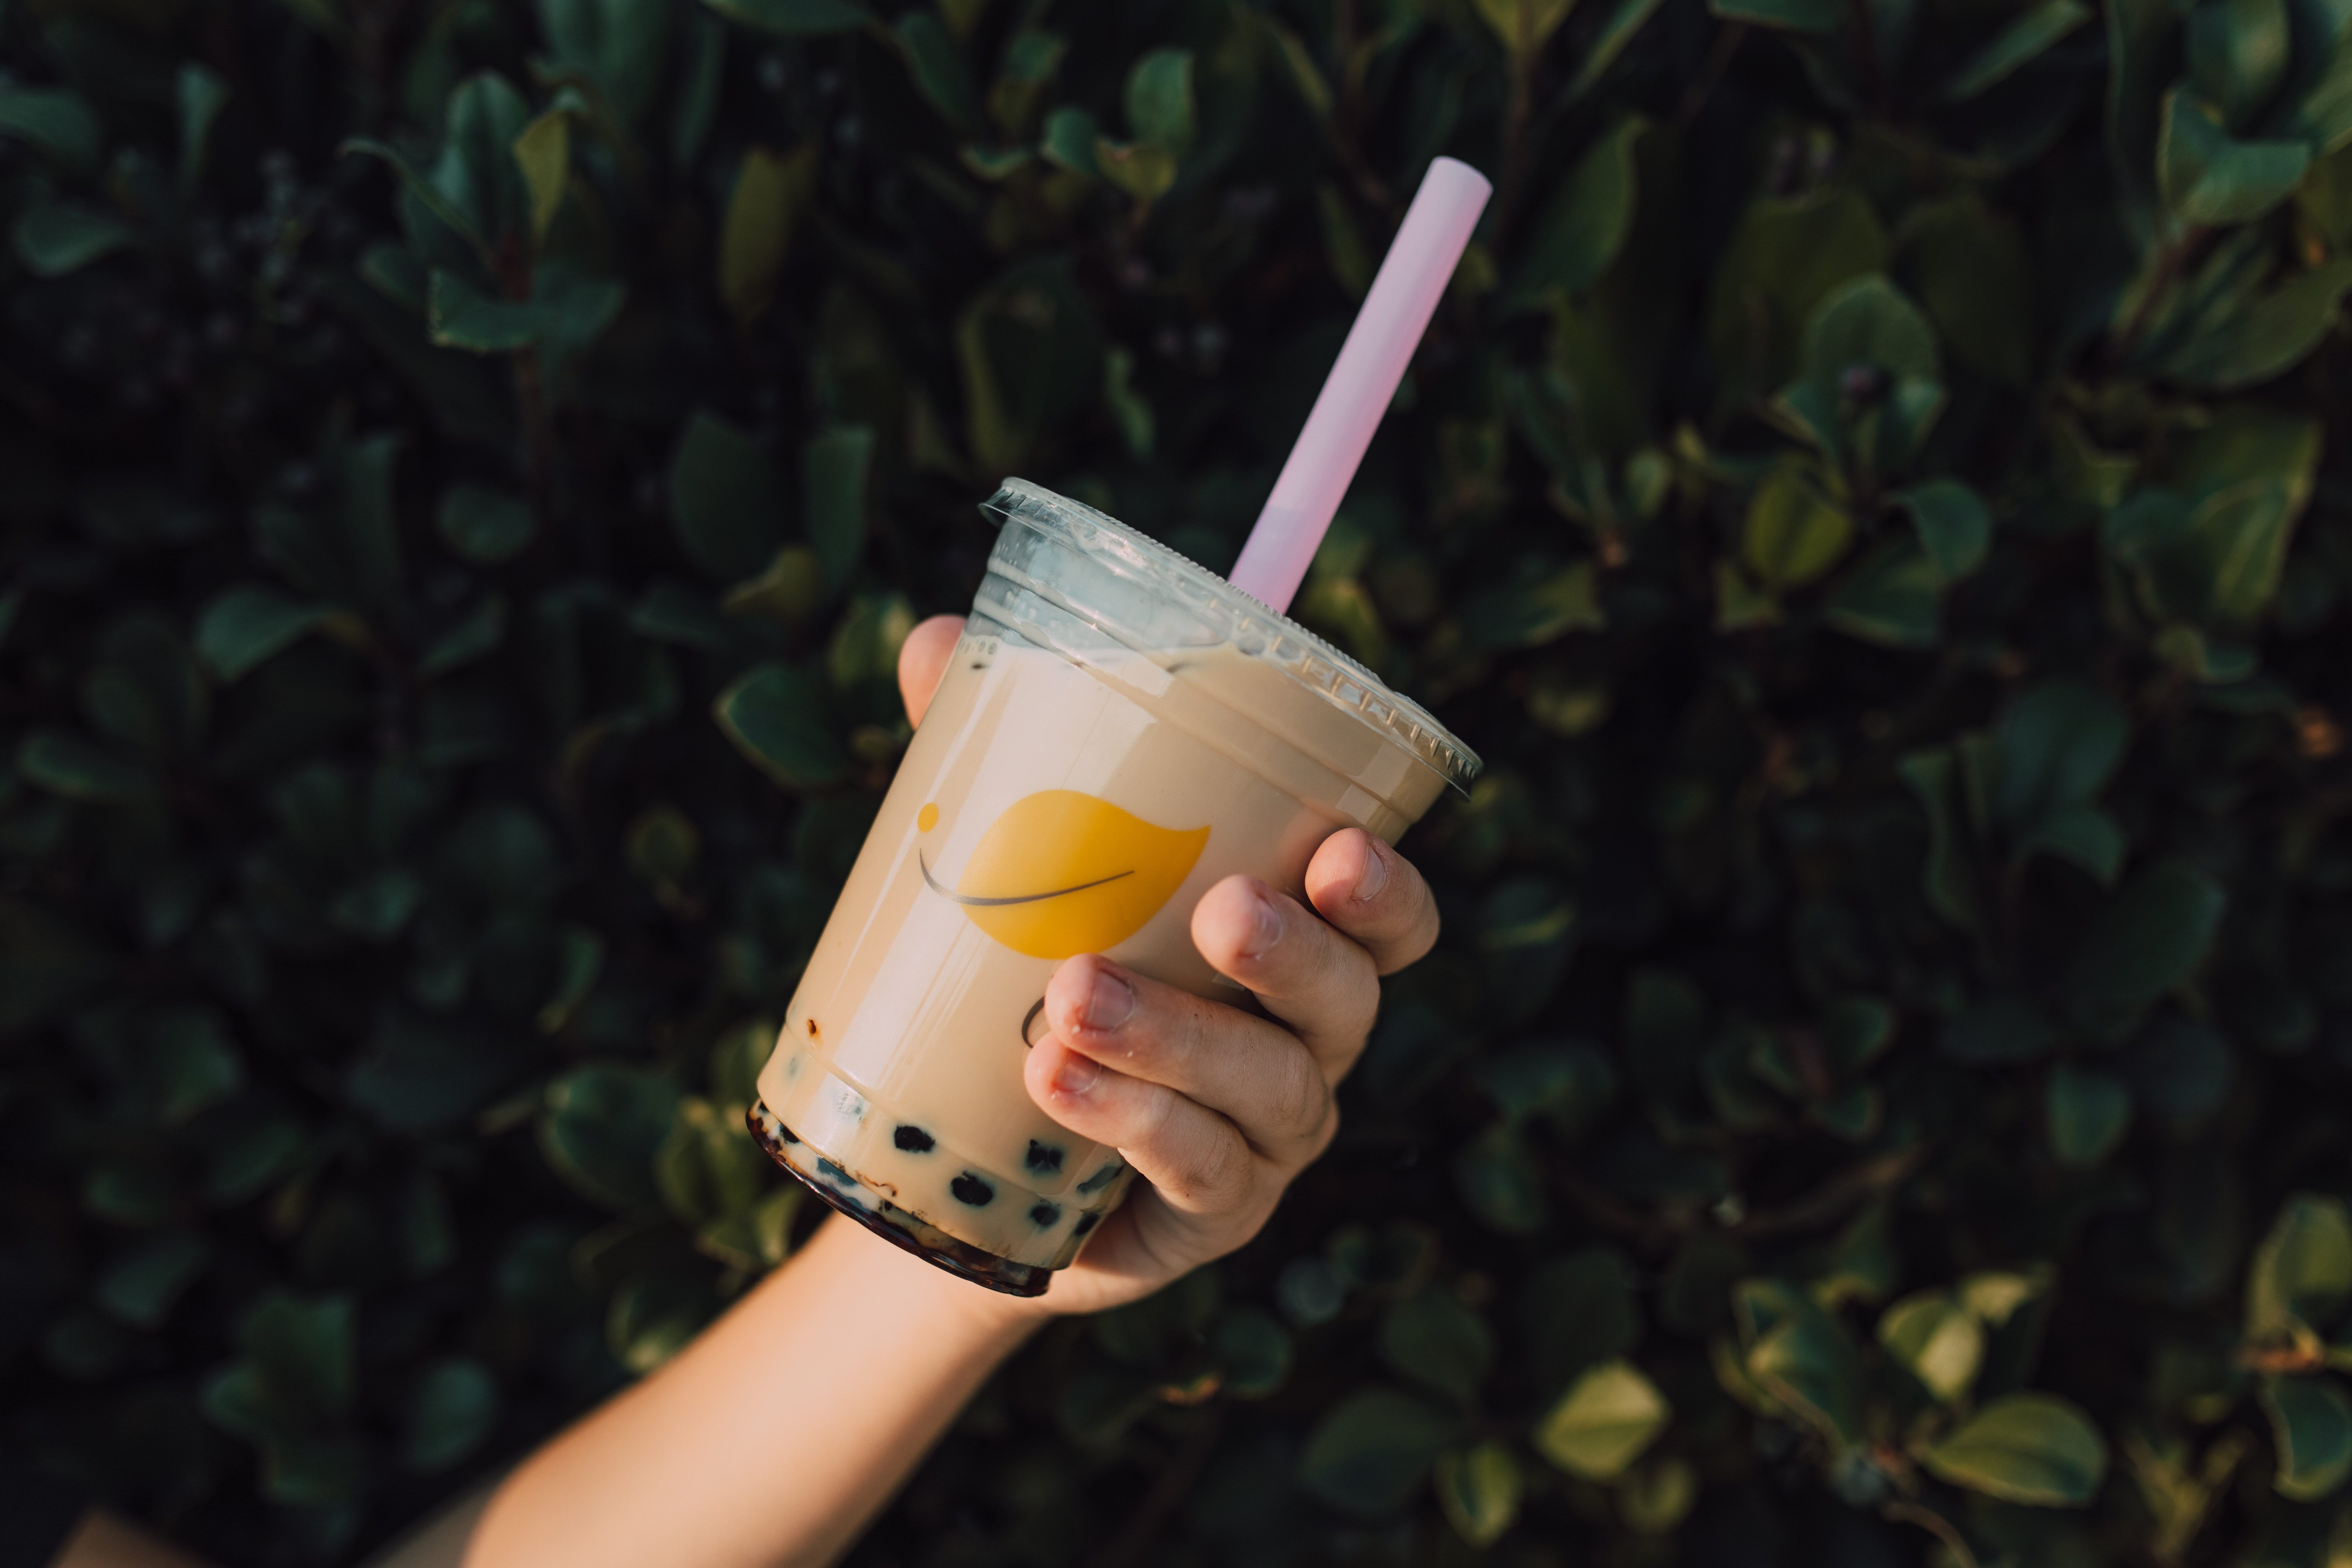 In Taiwan, Grabbing 'Boba' Means Something Else Entirely